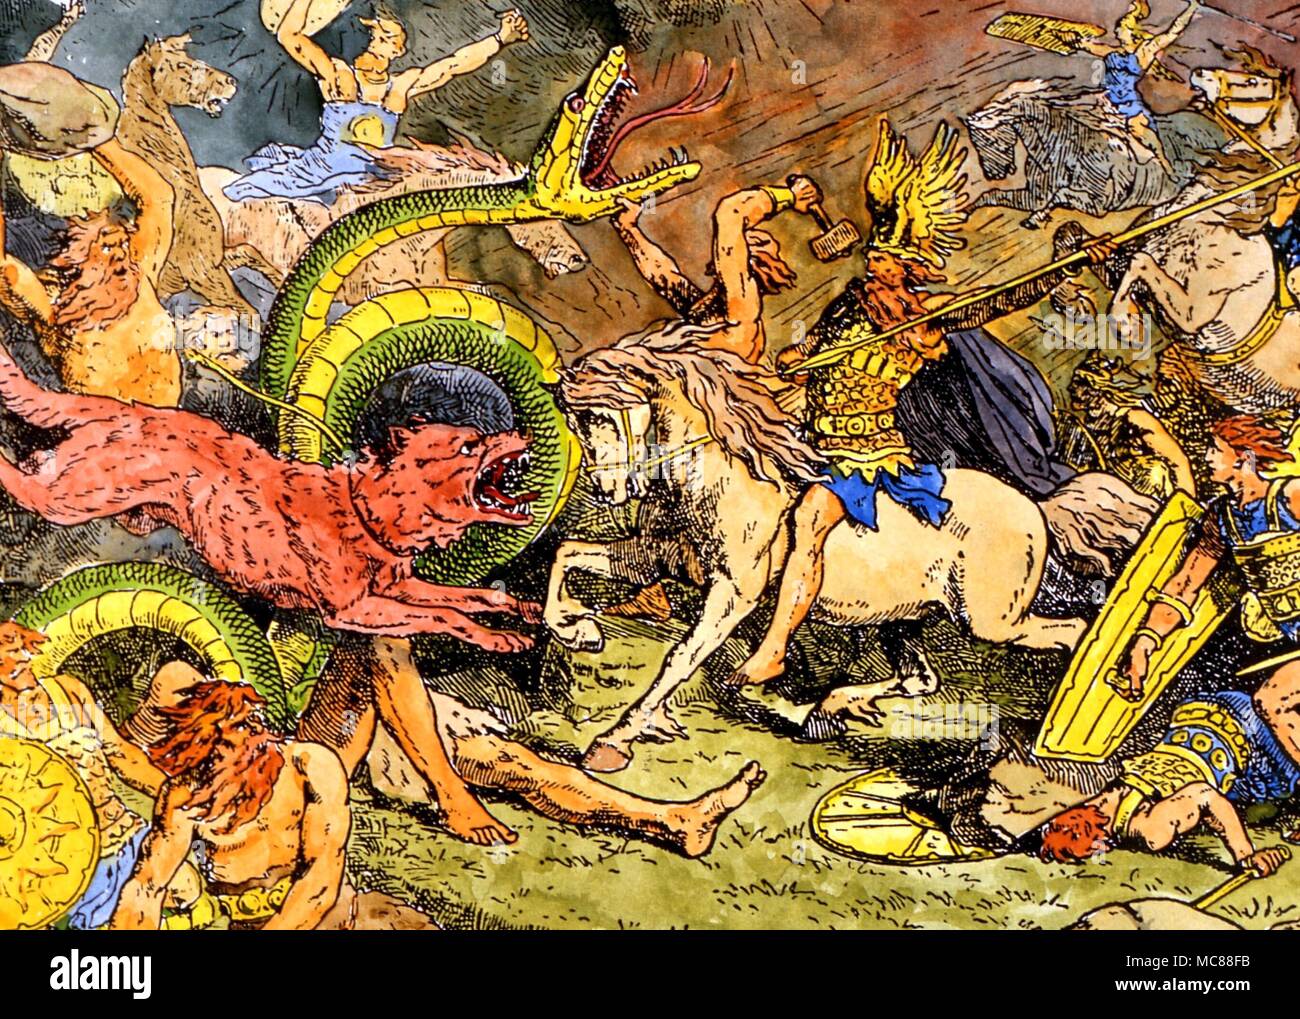 Wolf and serpent The Fenris Wolf at Ragnarok (the Twilight of the Gods) with the Midgard Serpent in the background. After a design by Johannes Gherts. 19th century German Stock Photo